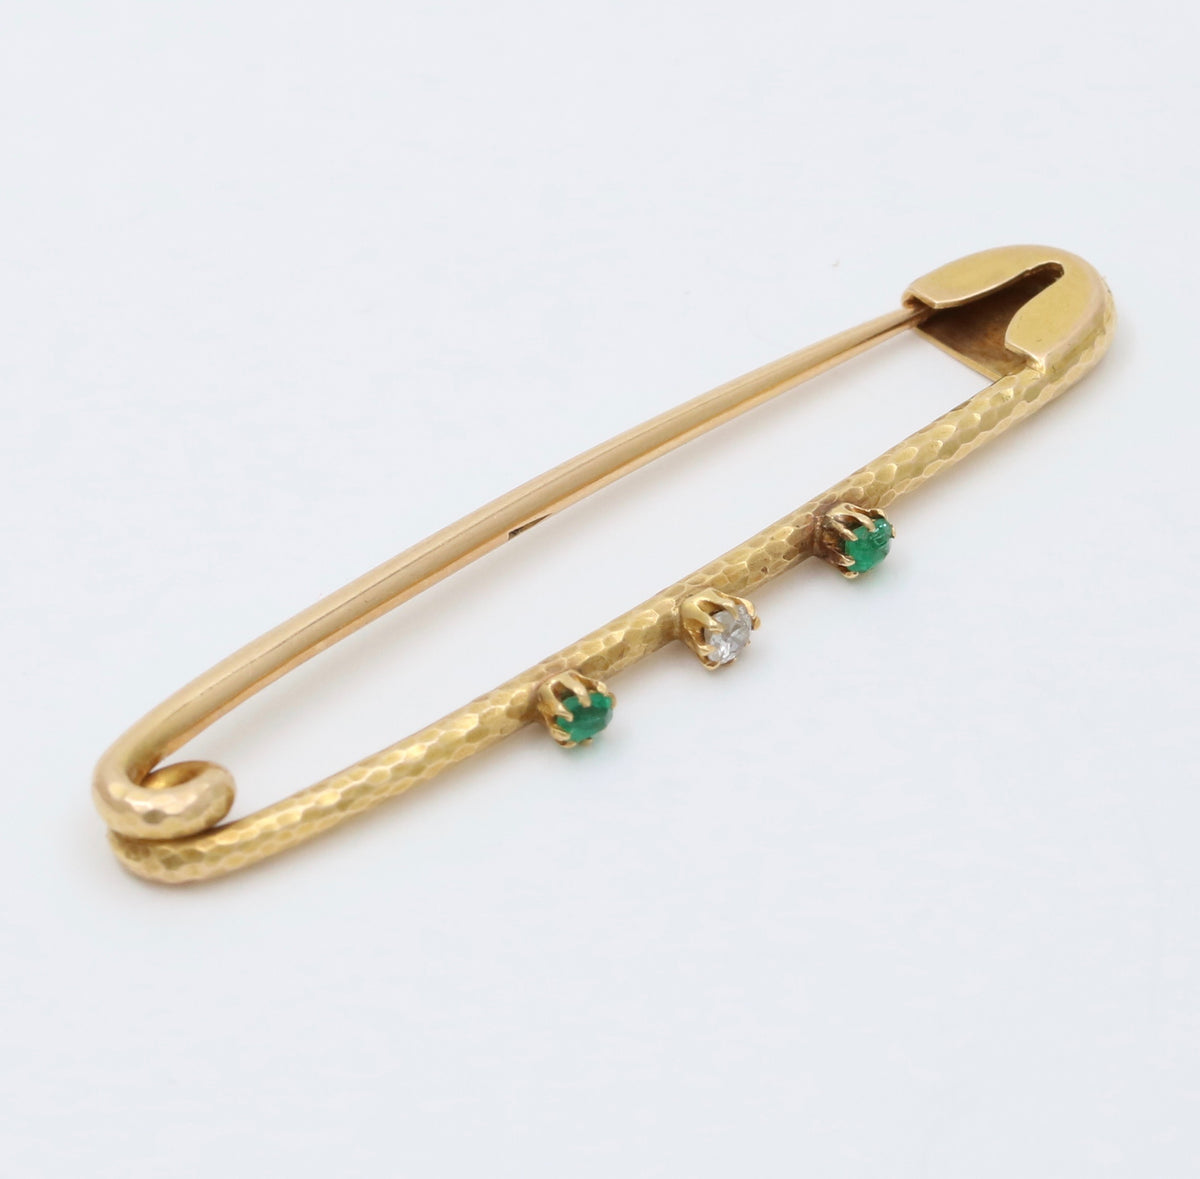 Vintage 18K Gold, Diamond and Emerald Safety Pin, Chain Extender, Charm Enhancer